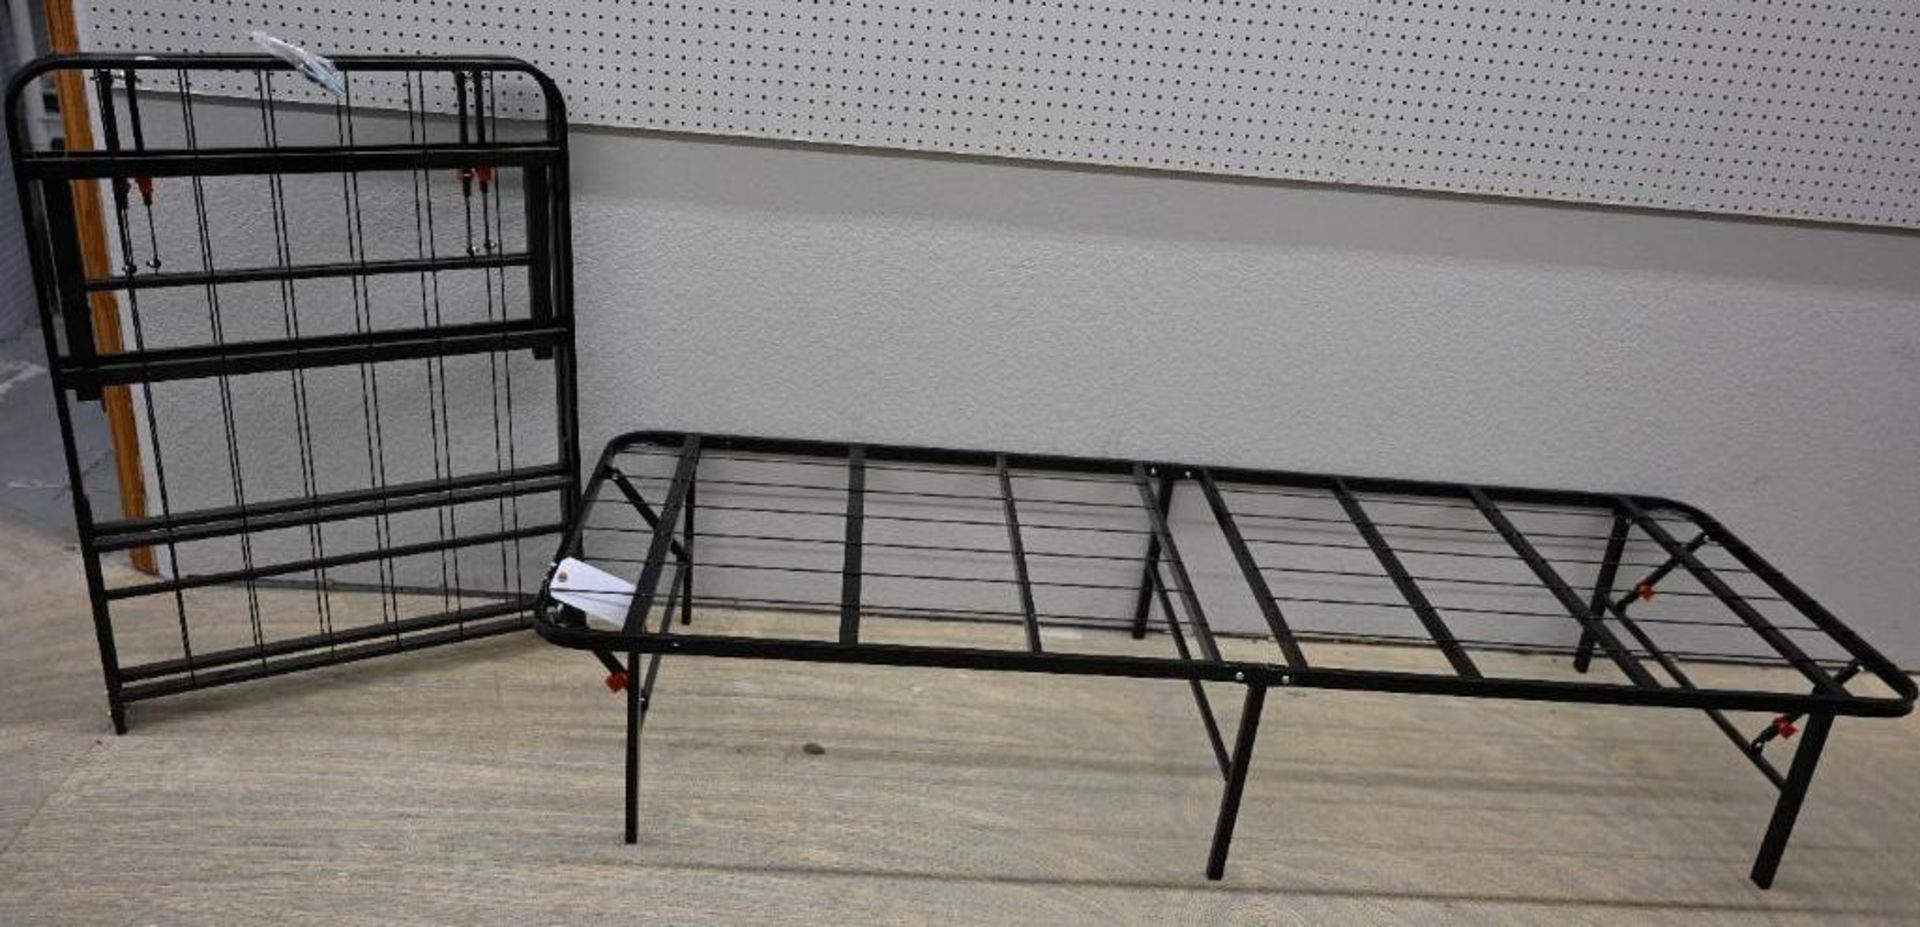 Two 28.5" x78.5" x 14" Metal Fold Up Box Springs - Image 4 of 4